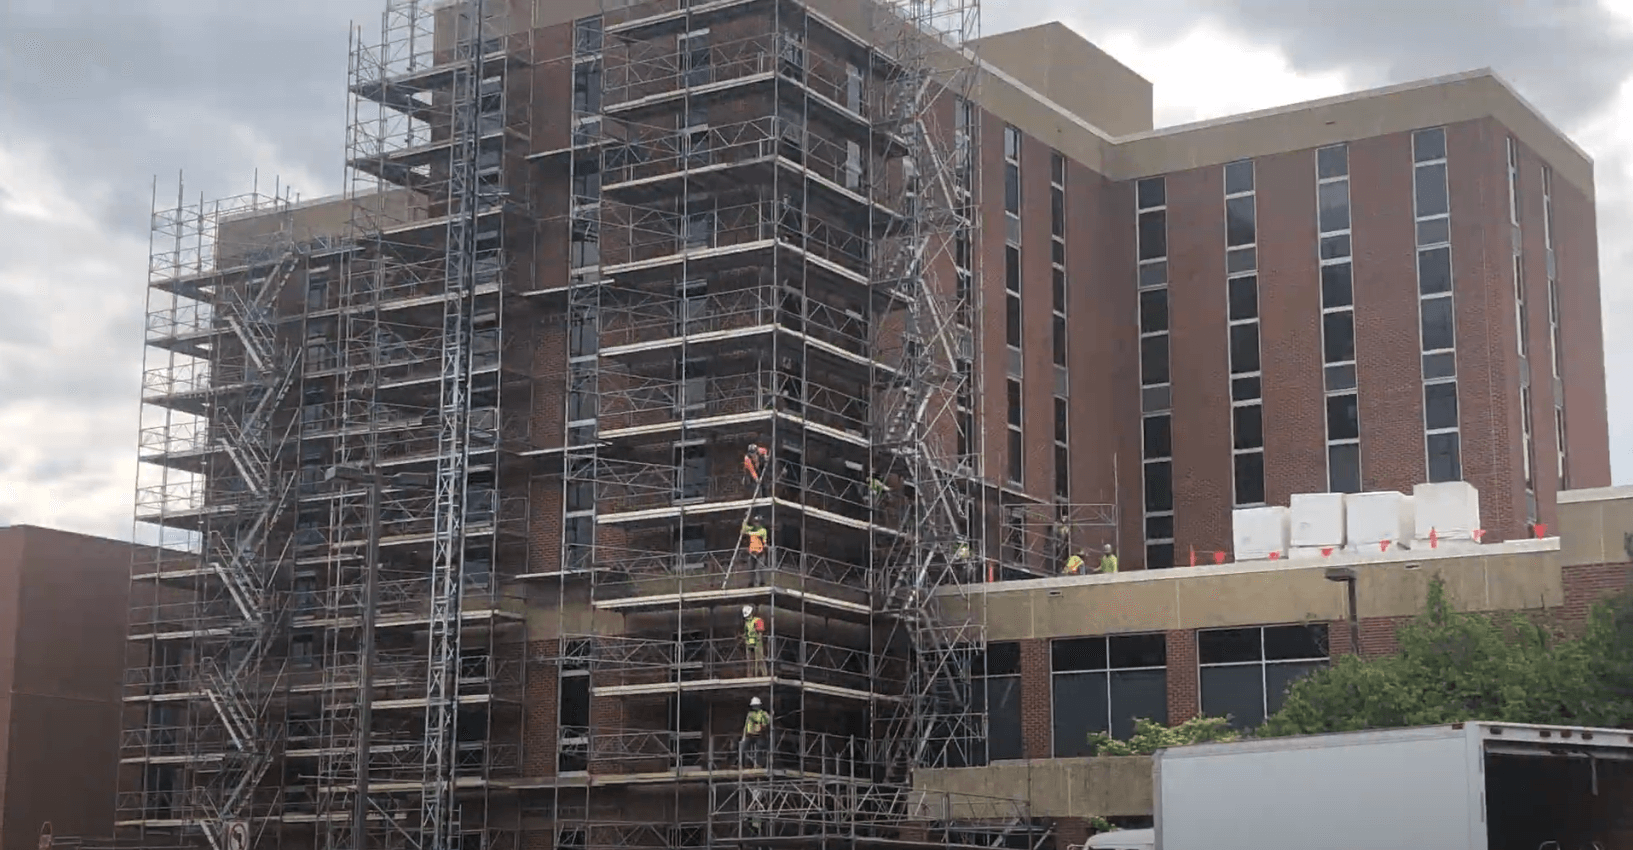 Scaffolding Solutions project at James Madison University